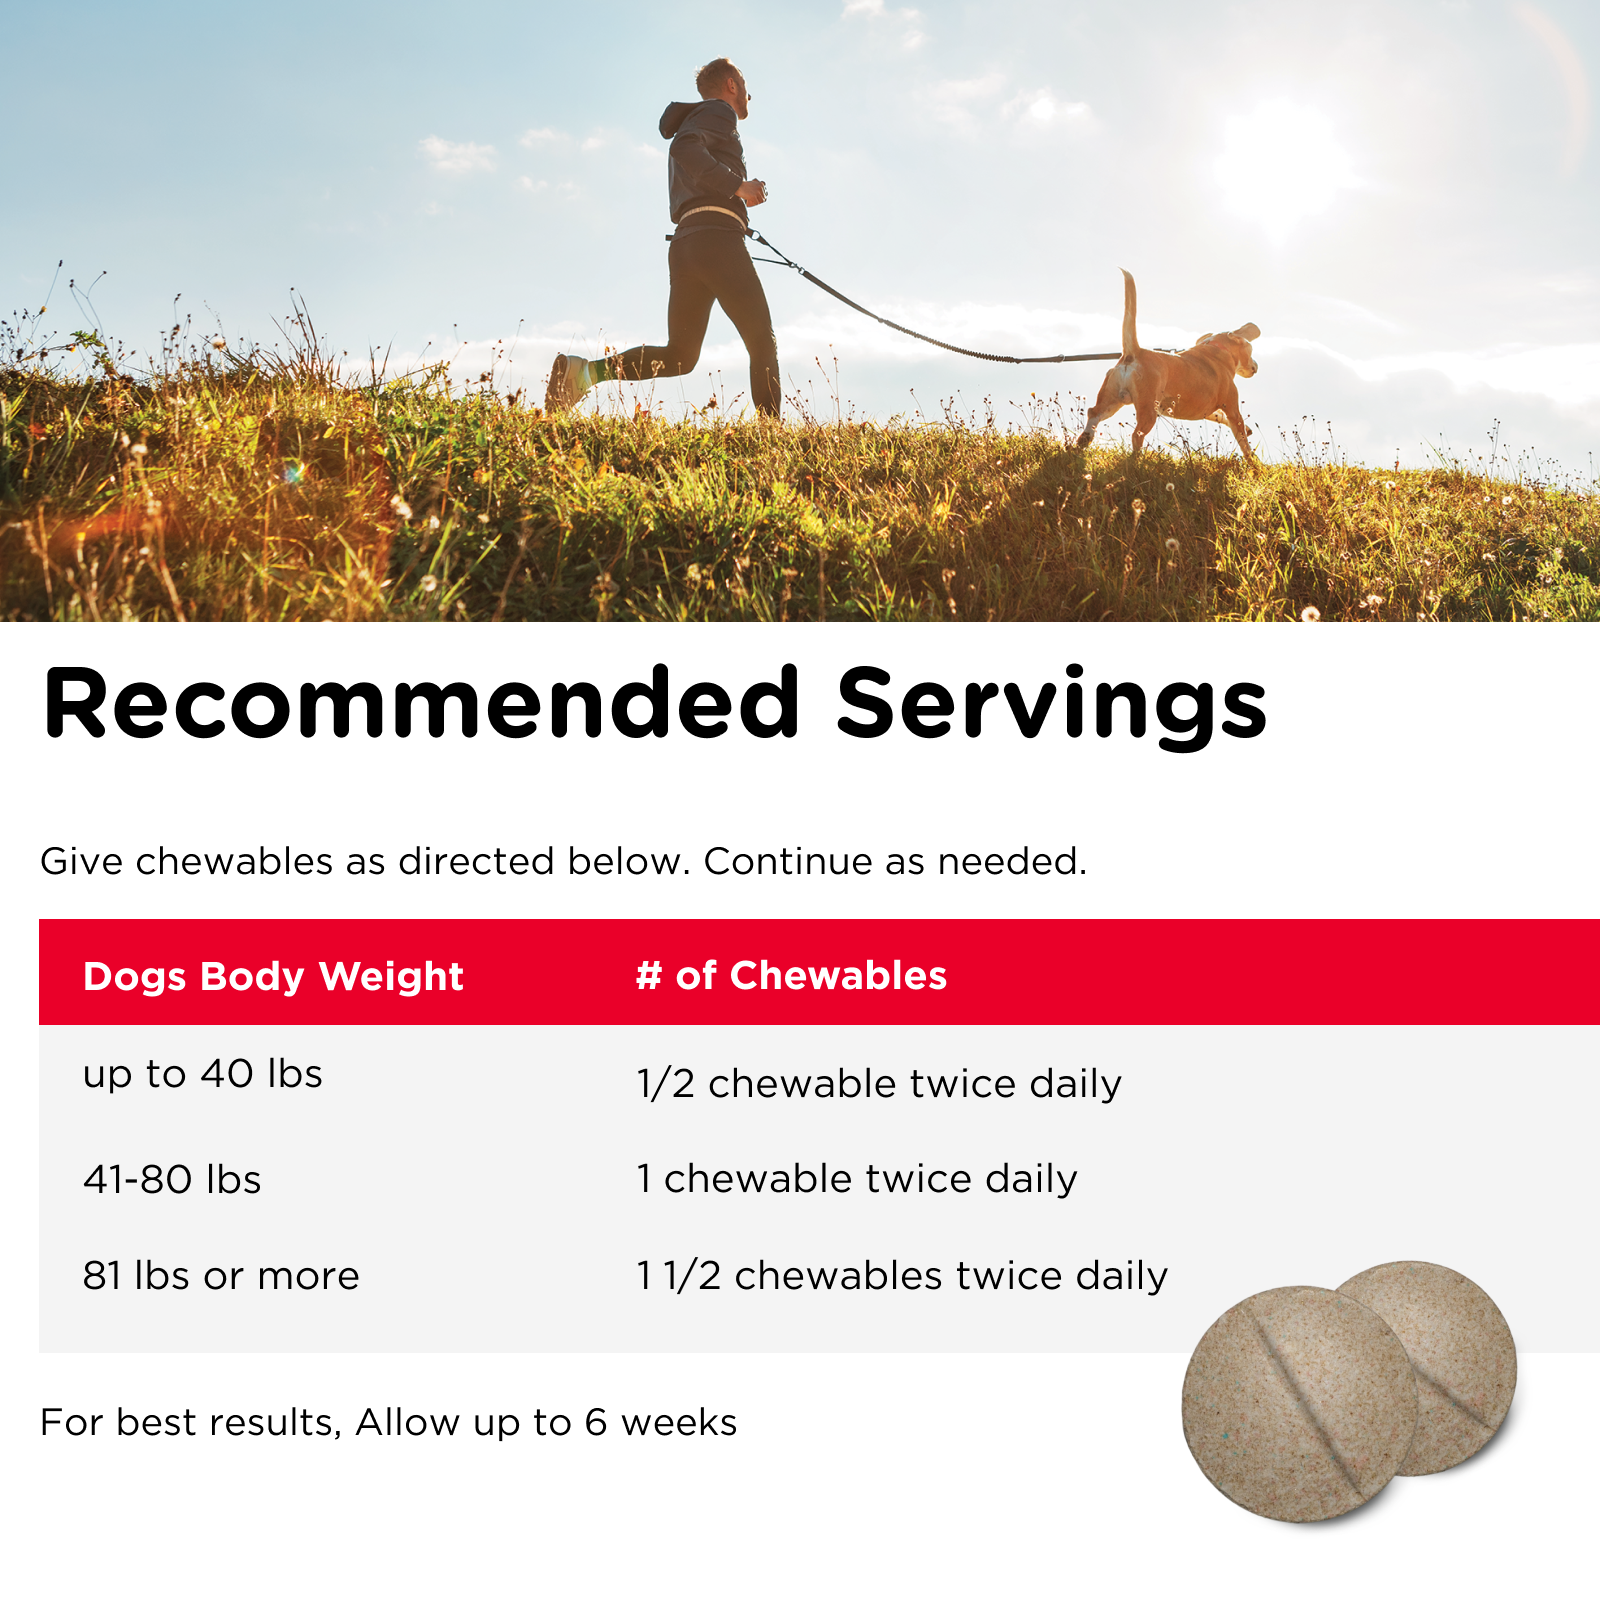 Hip and Joint Regular Strength Chewable Tablets recommended servings